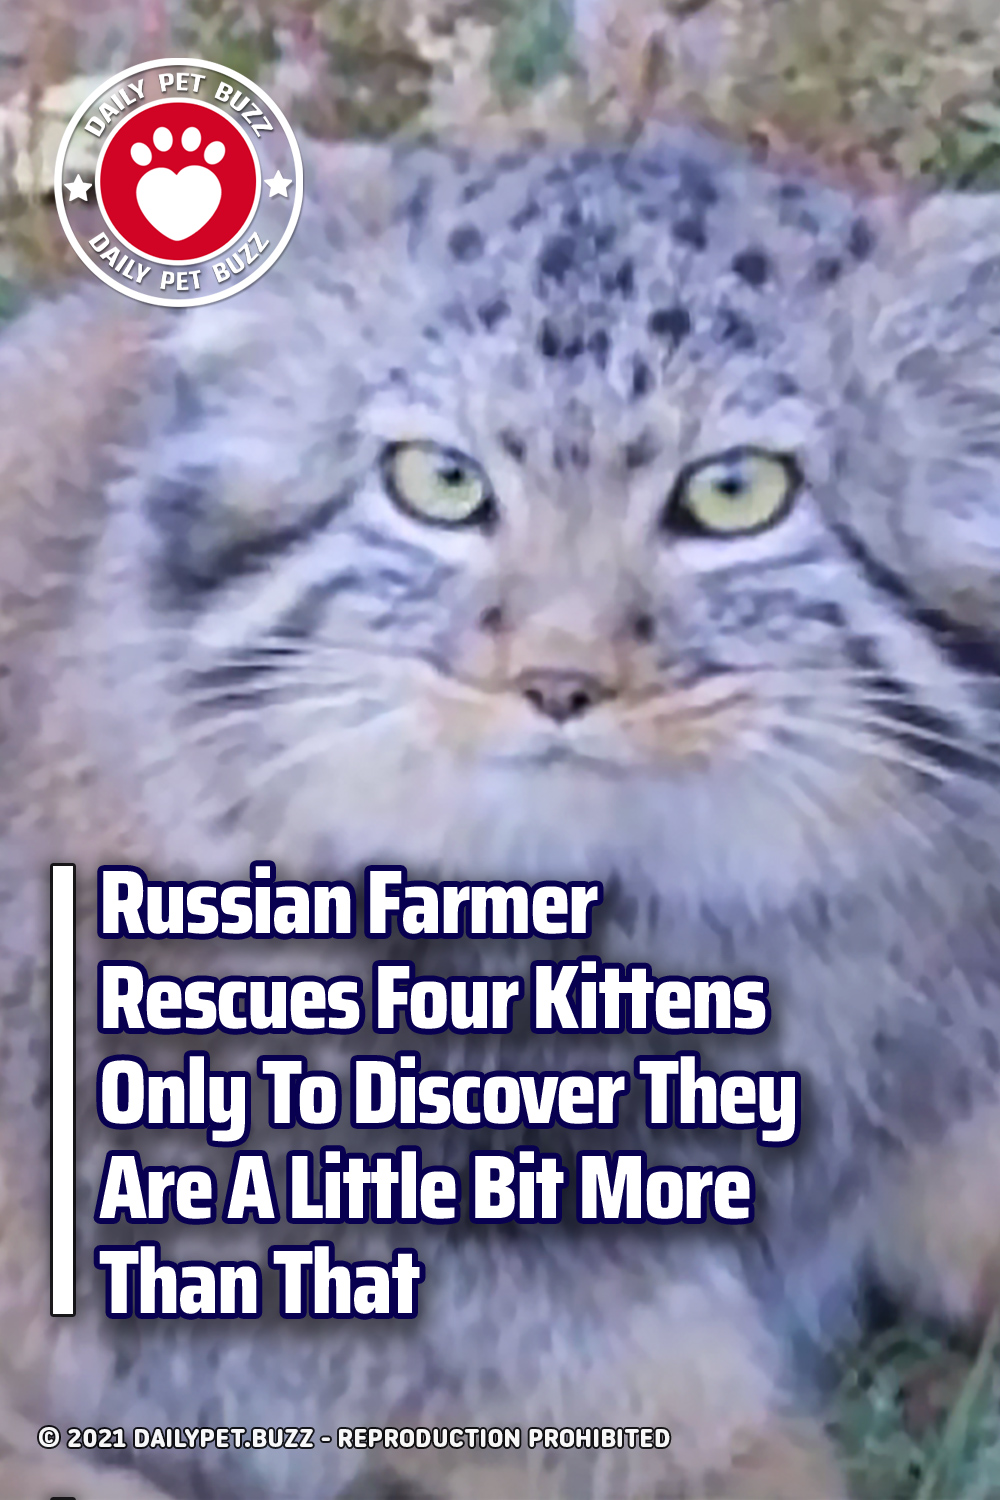 Russian Farmer Rescues Four Kittens Only To Discover They Are A Little Bit More Than That